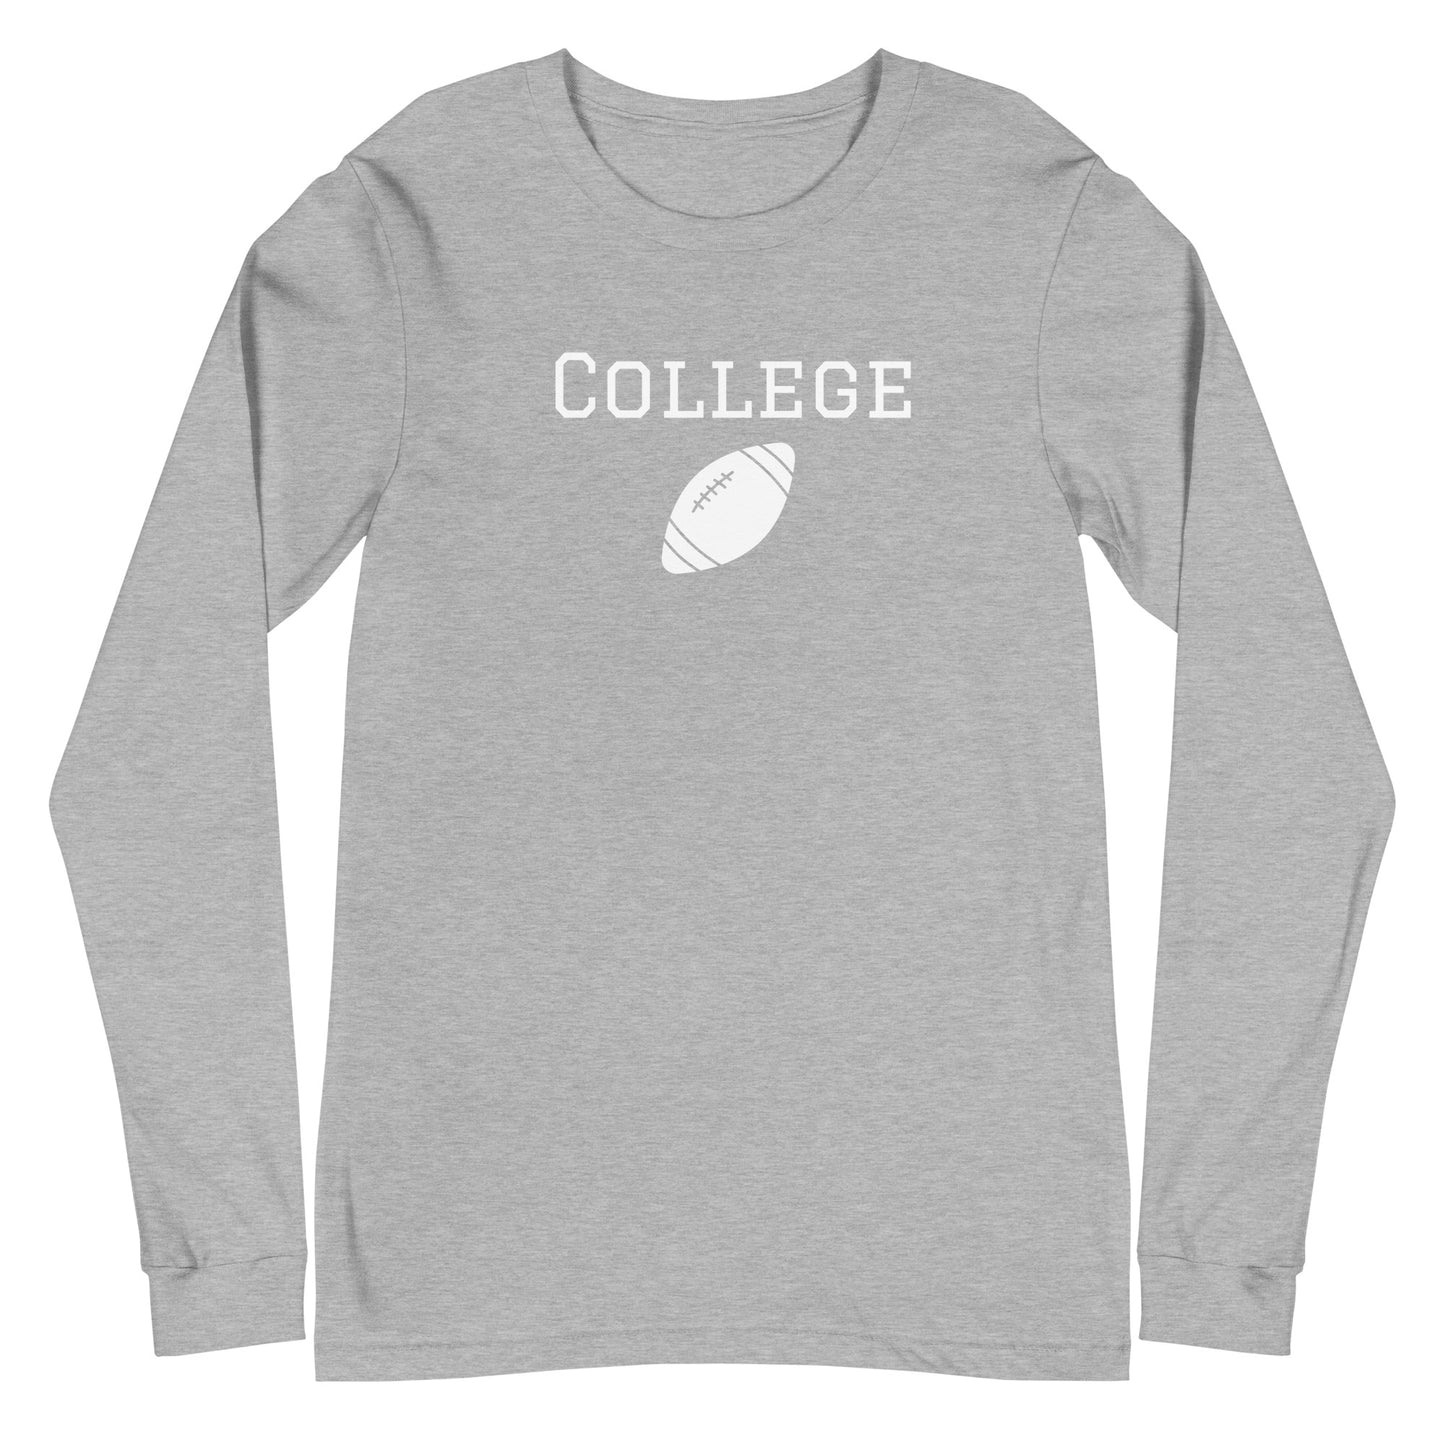 Grey long sleeve tee shirt that says 'college' and has a picture of a football 